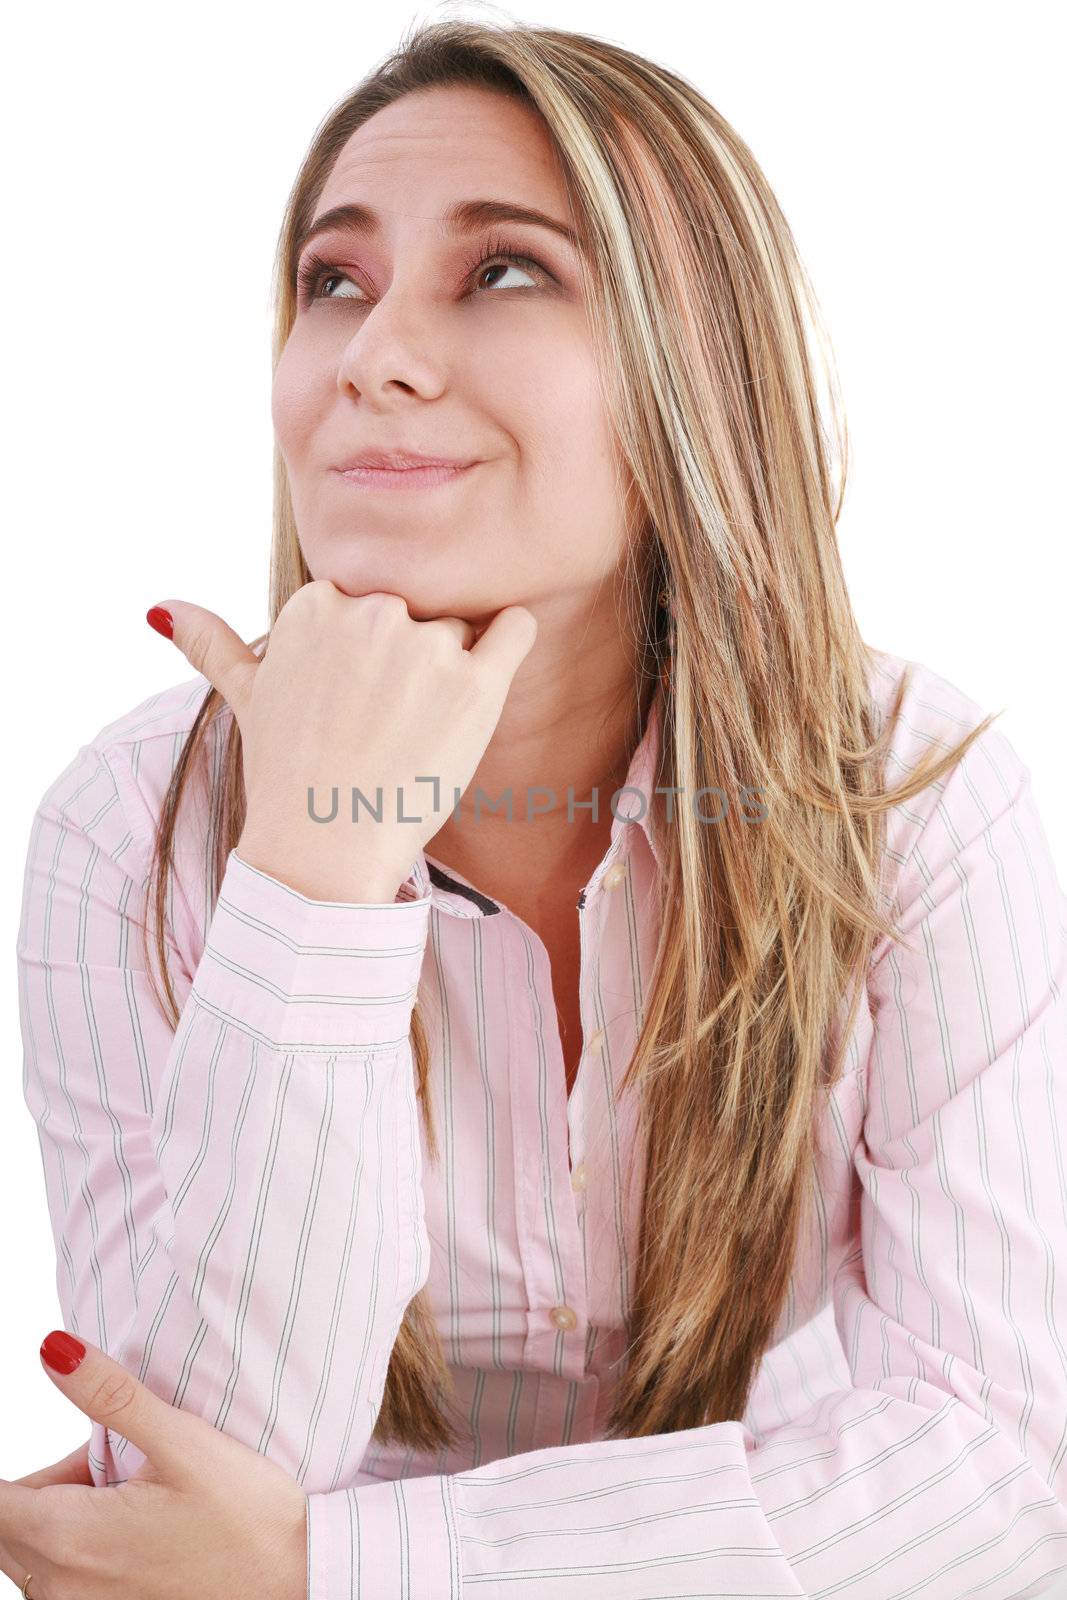 Thinking woman pondering over something